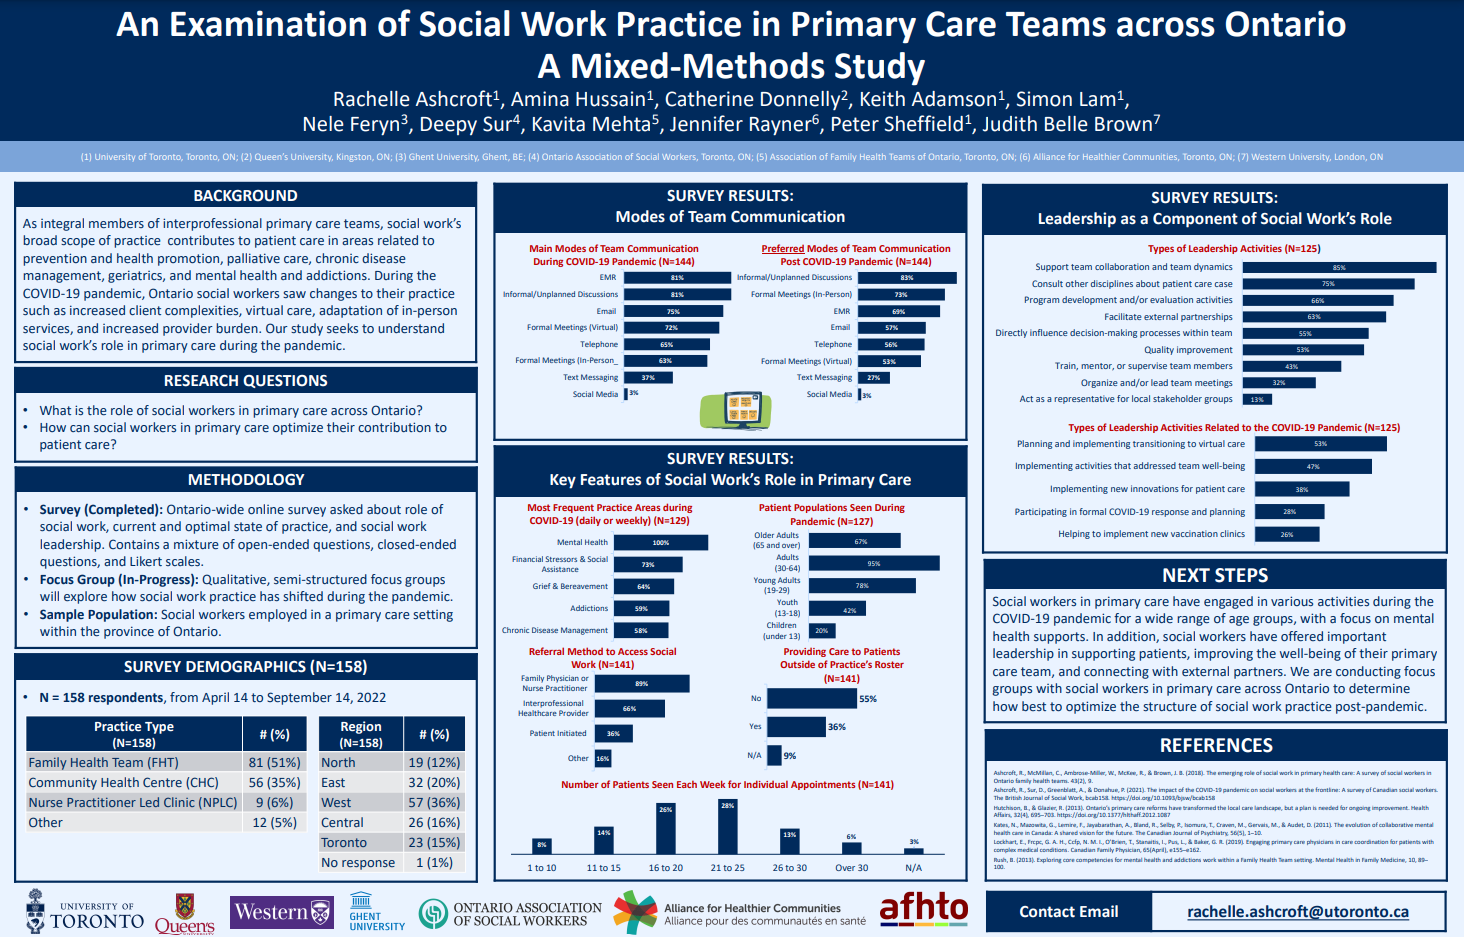 Thumbnail image of poster: An Examination of Social Work Practice in Primary Care Teams across Ontario - A Mixed-Methods Study. Image is hyperlinked to a larger PDF version